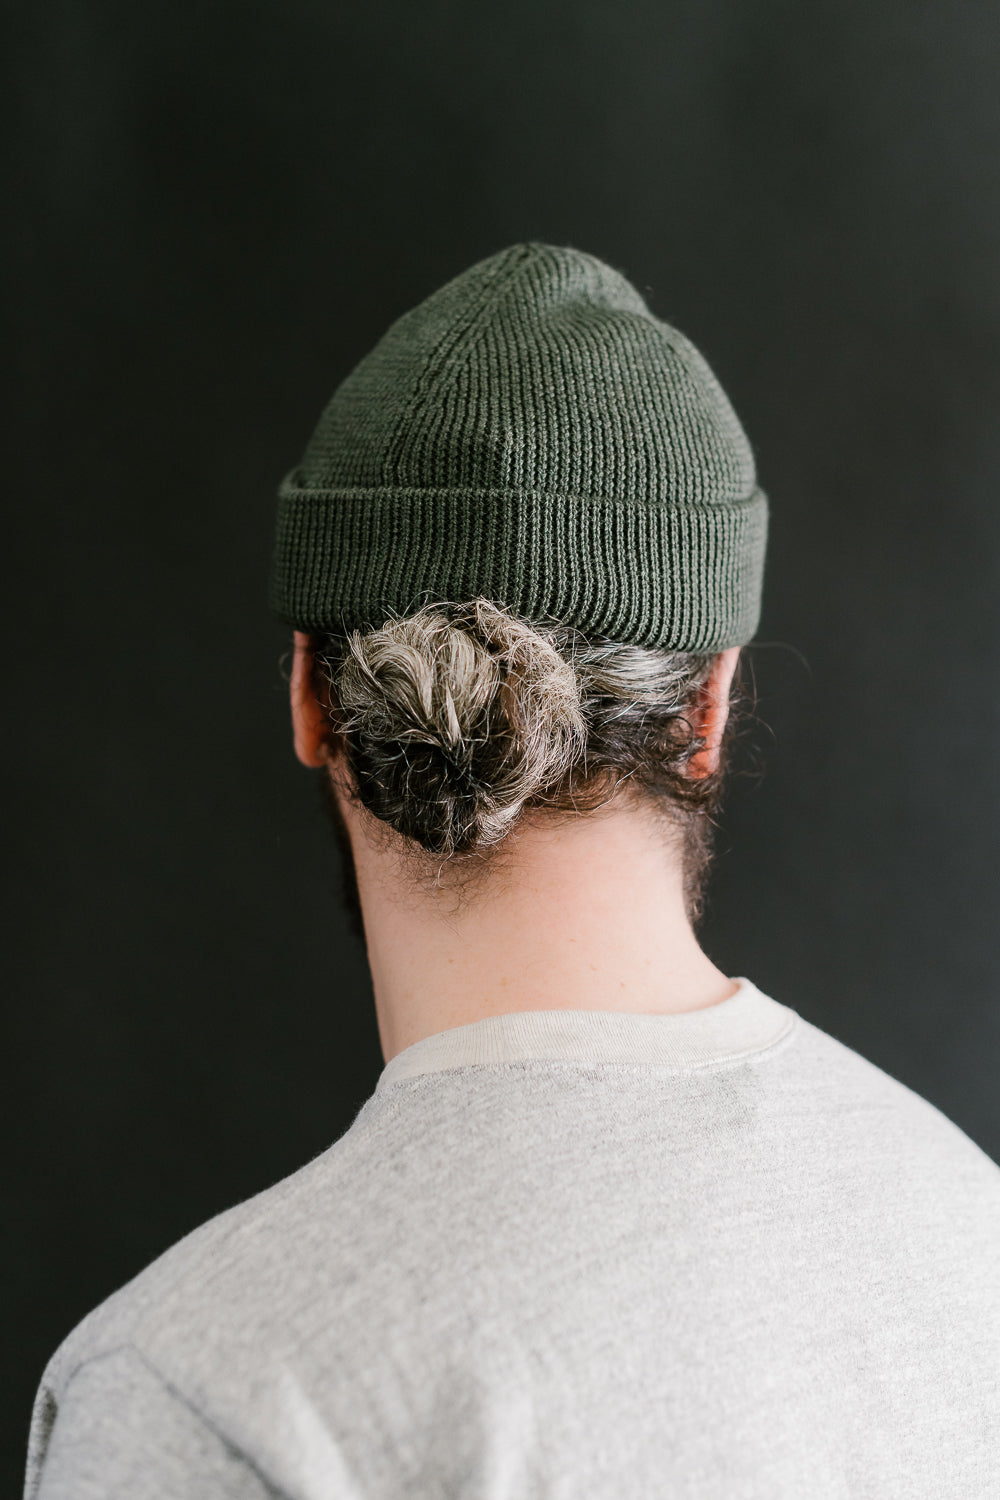 Watch Structure - Merino Cap Ribbed - | MWBN05.40 Army Dant Wool James